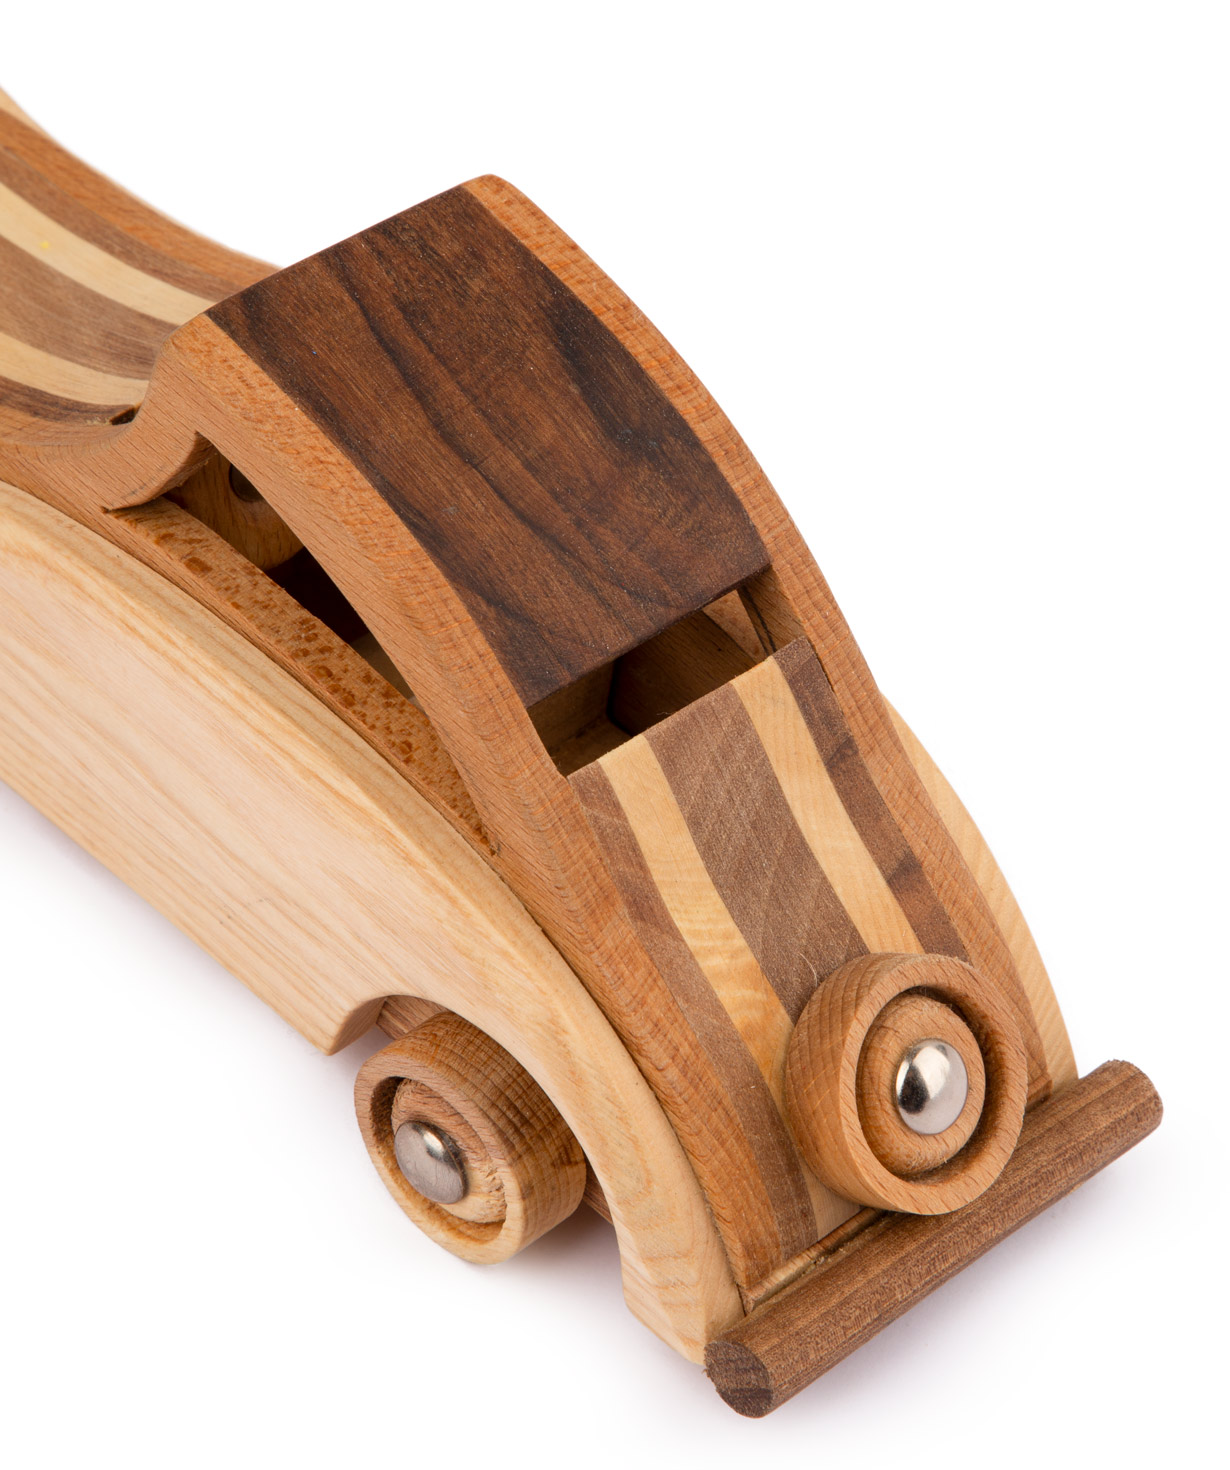 Toy `I'm wooden toys` wooden, retro car